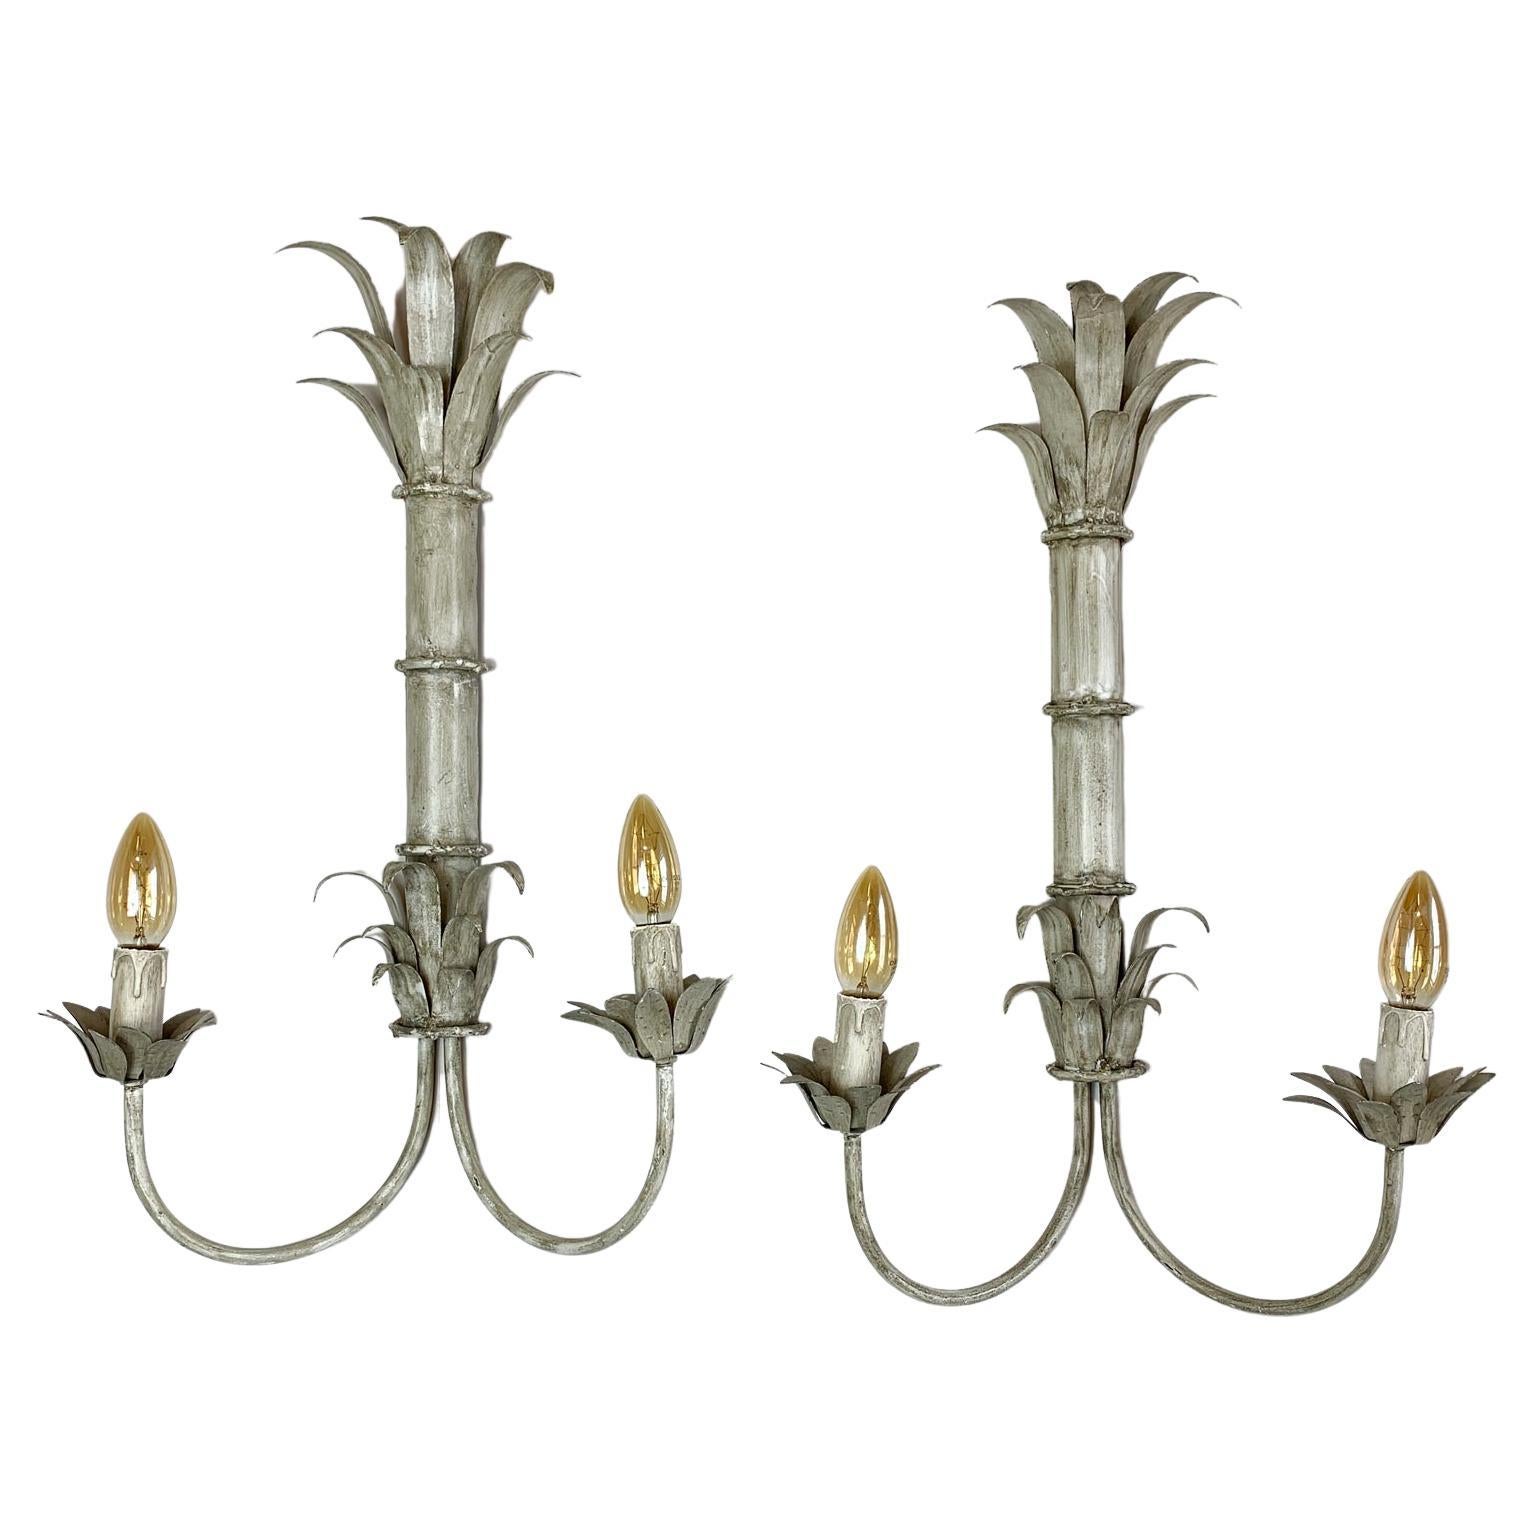 1970's Toleware Palm Reeds Wall Sconces